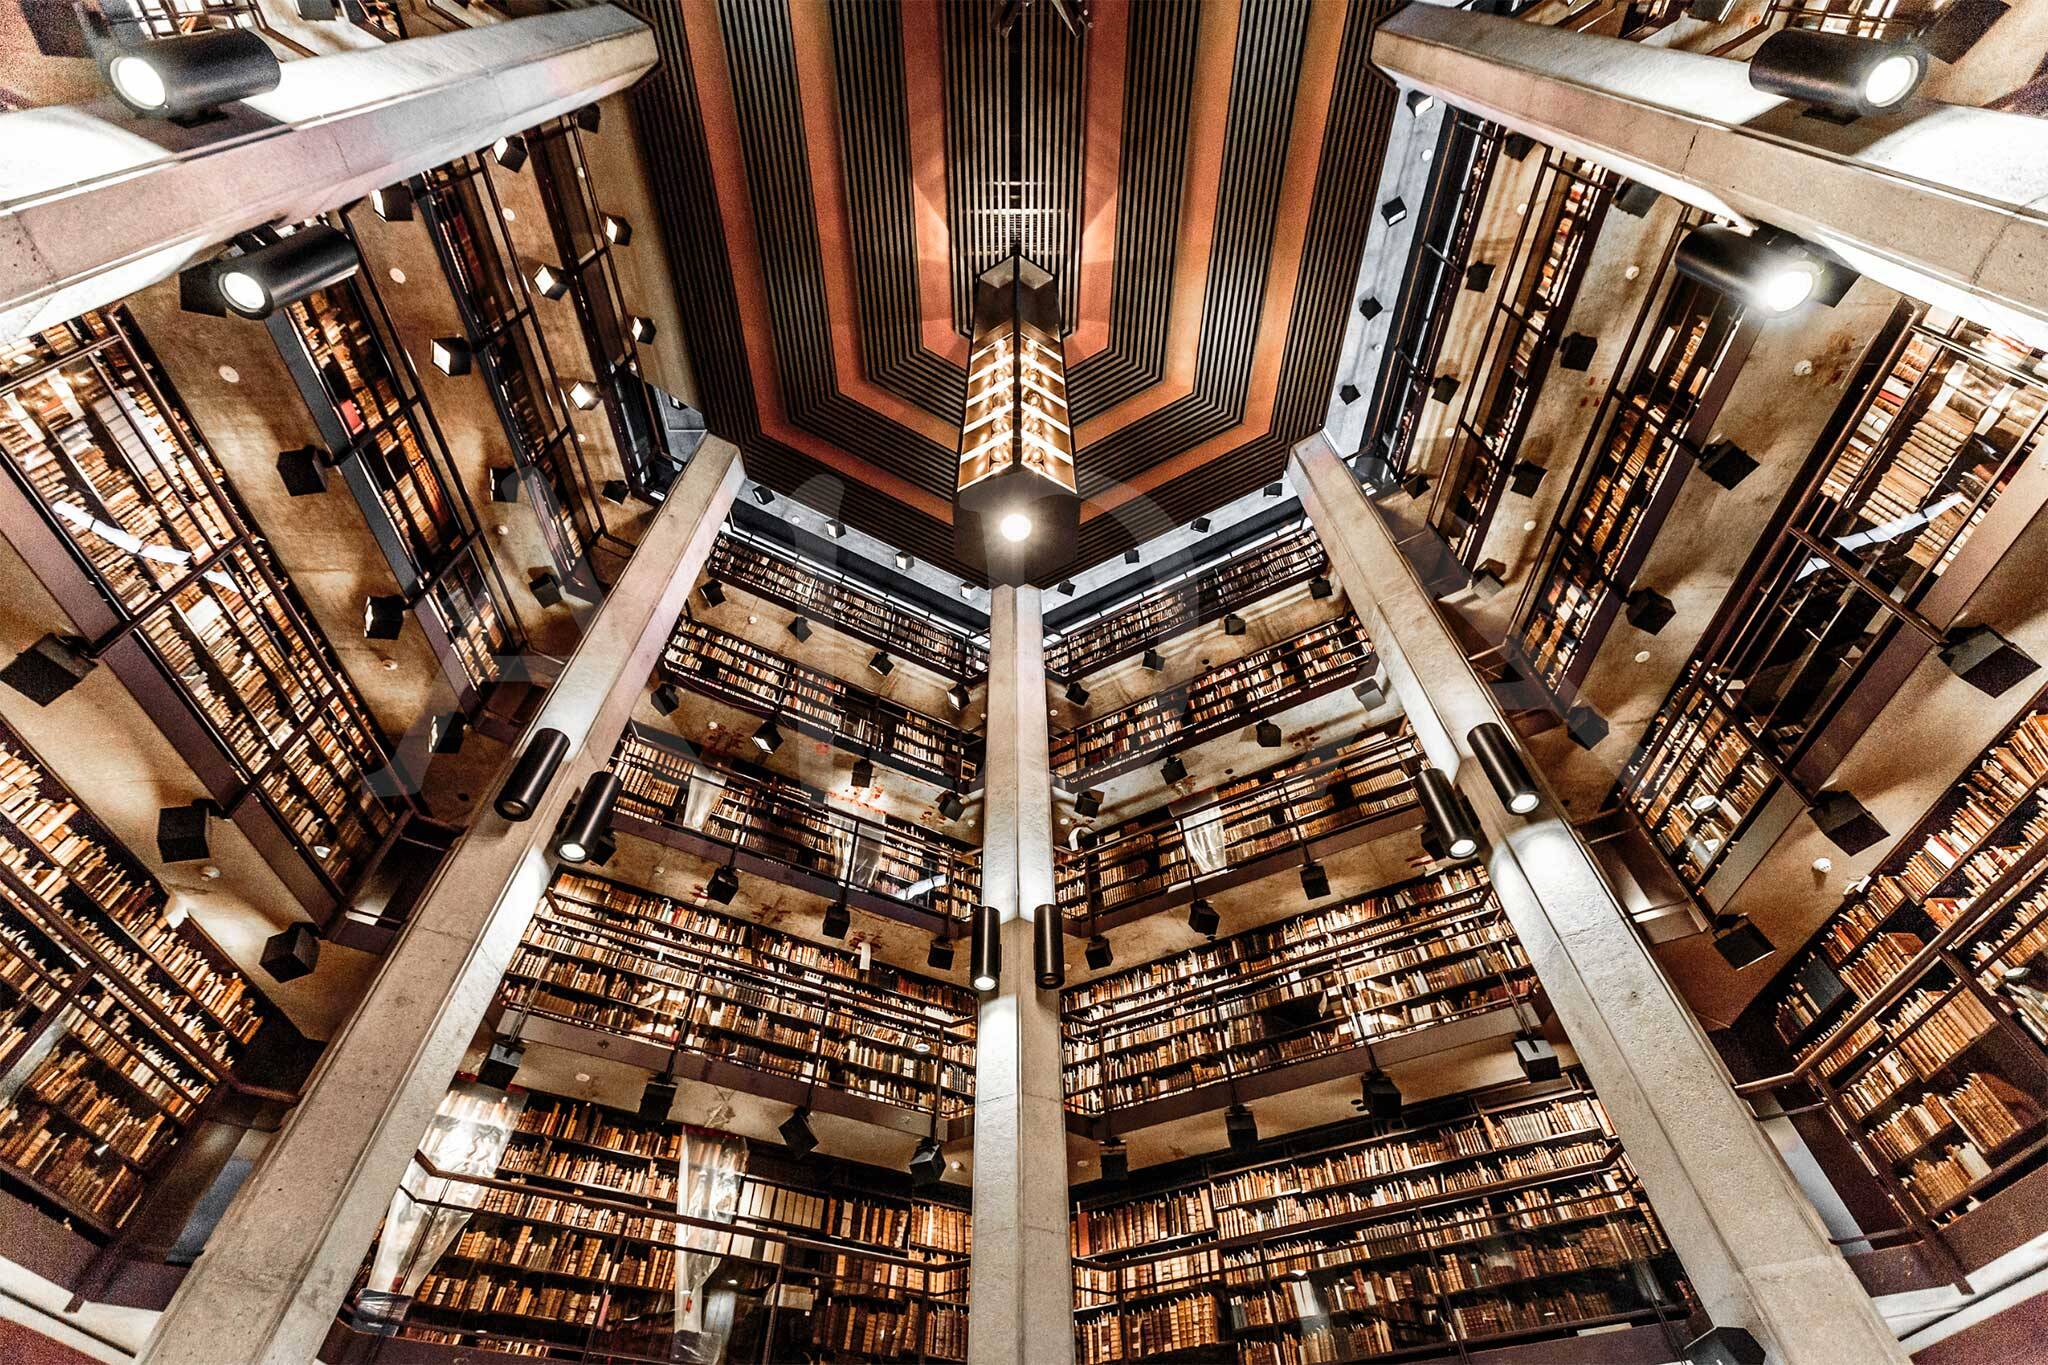 The Thomas Fisher Rare Book library